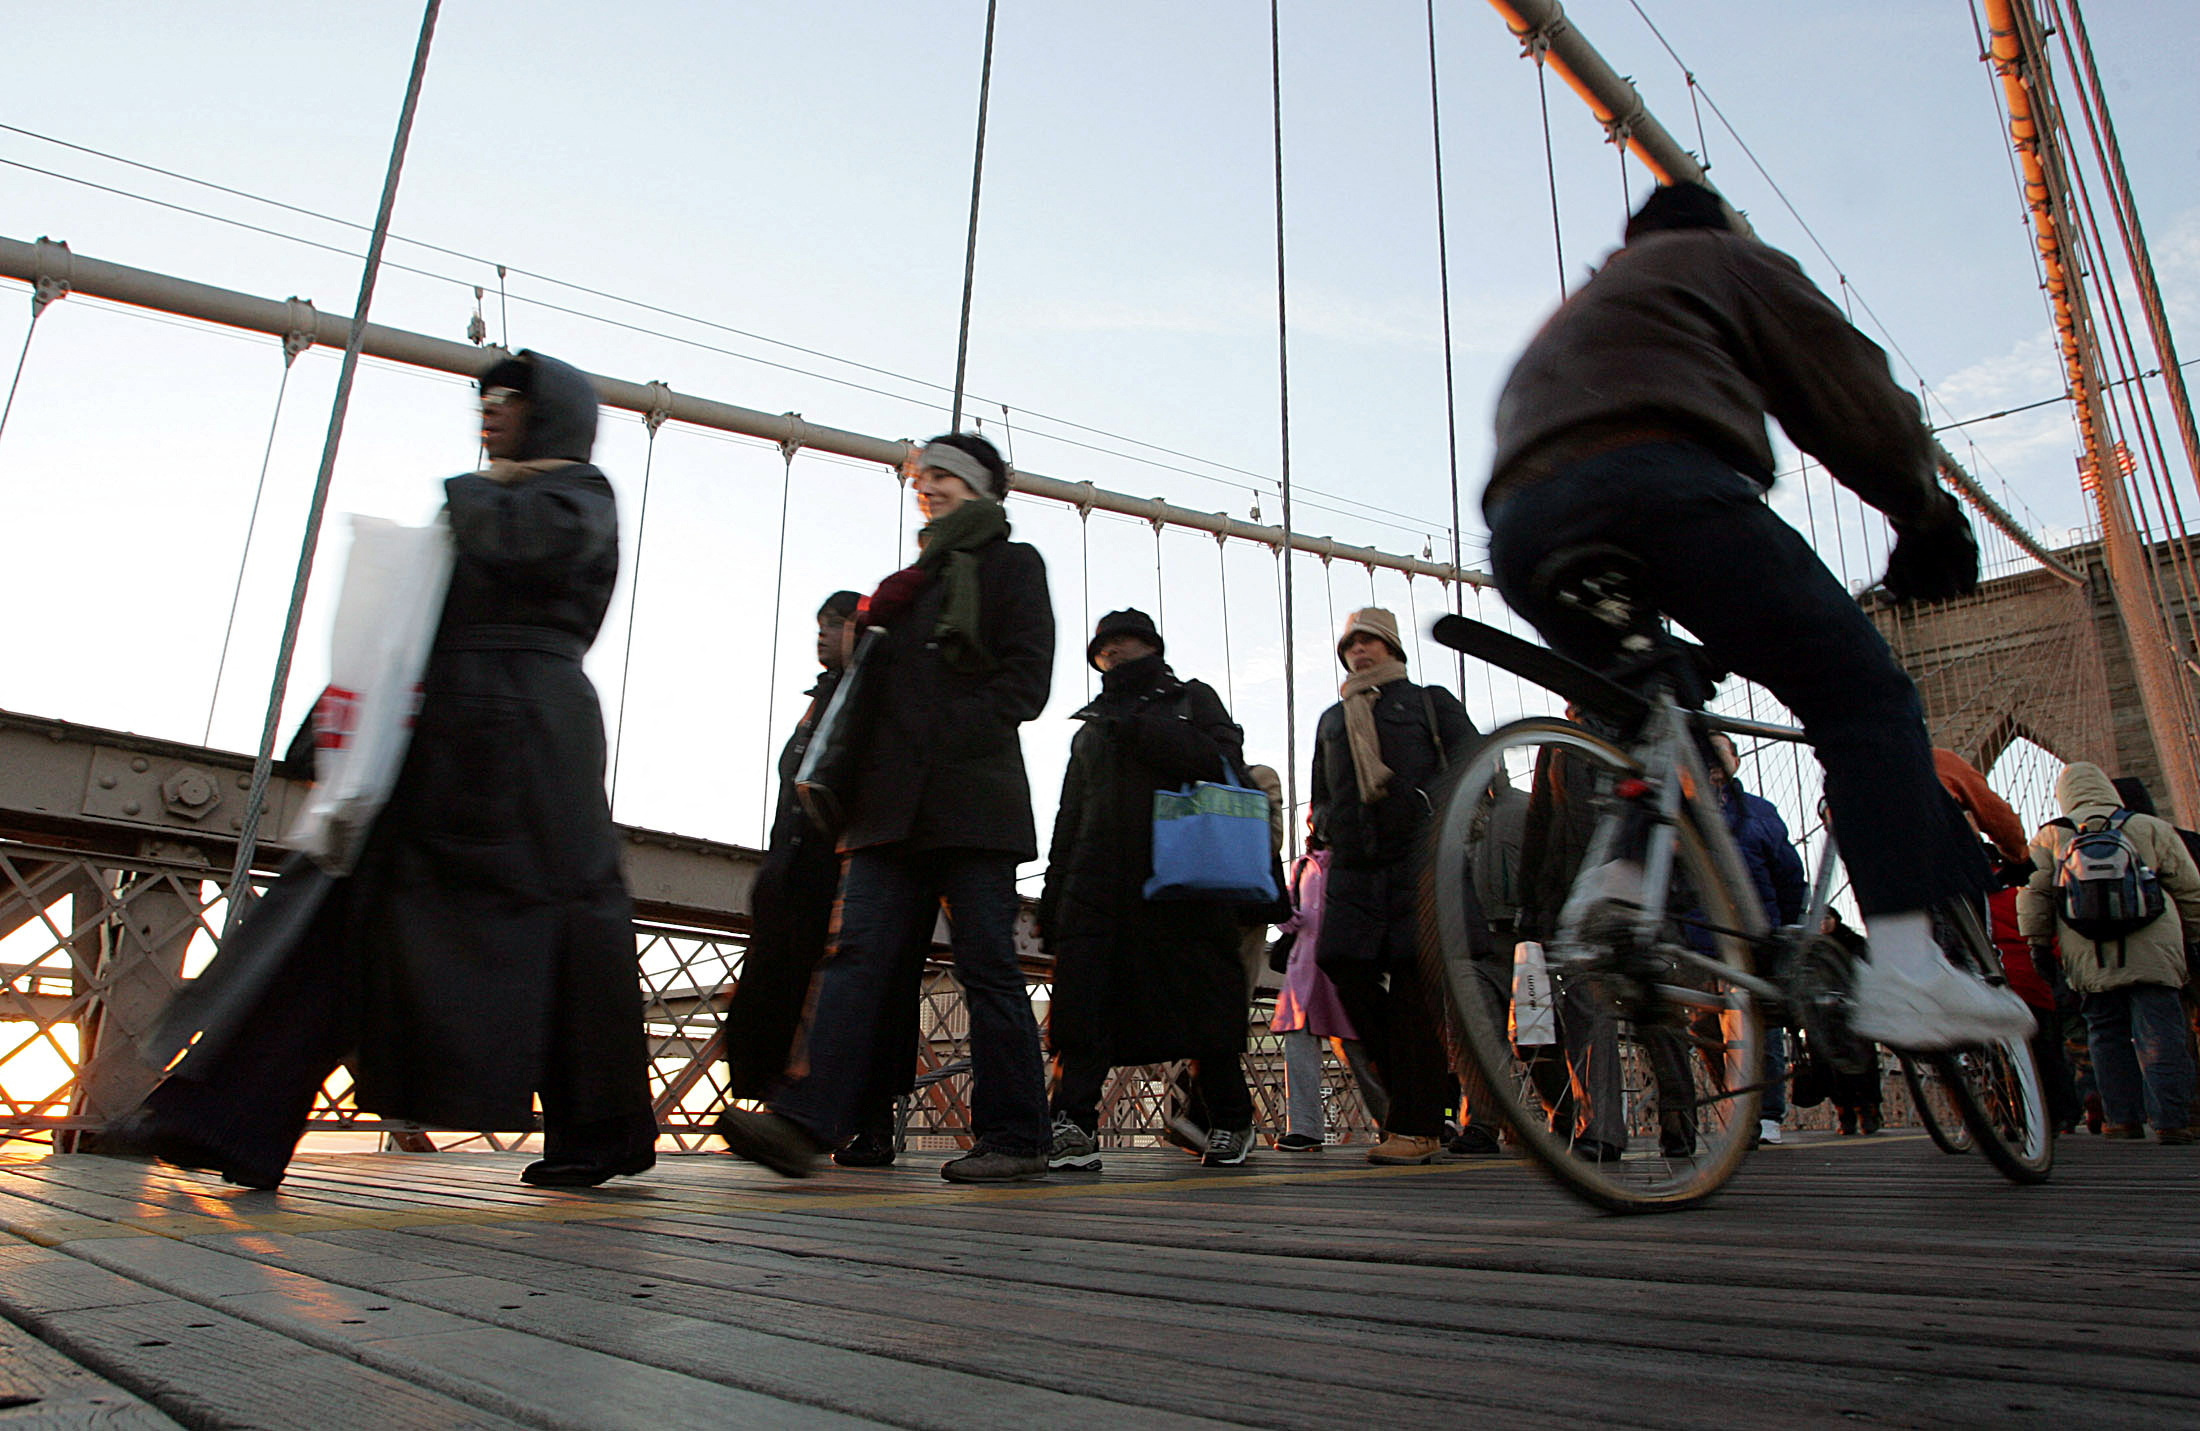 Commuters pack the Brooklyn Bridge during the evening rush hour in New York